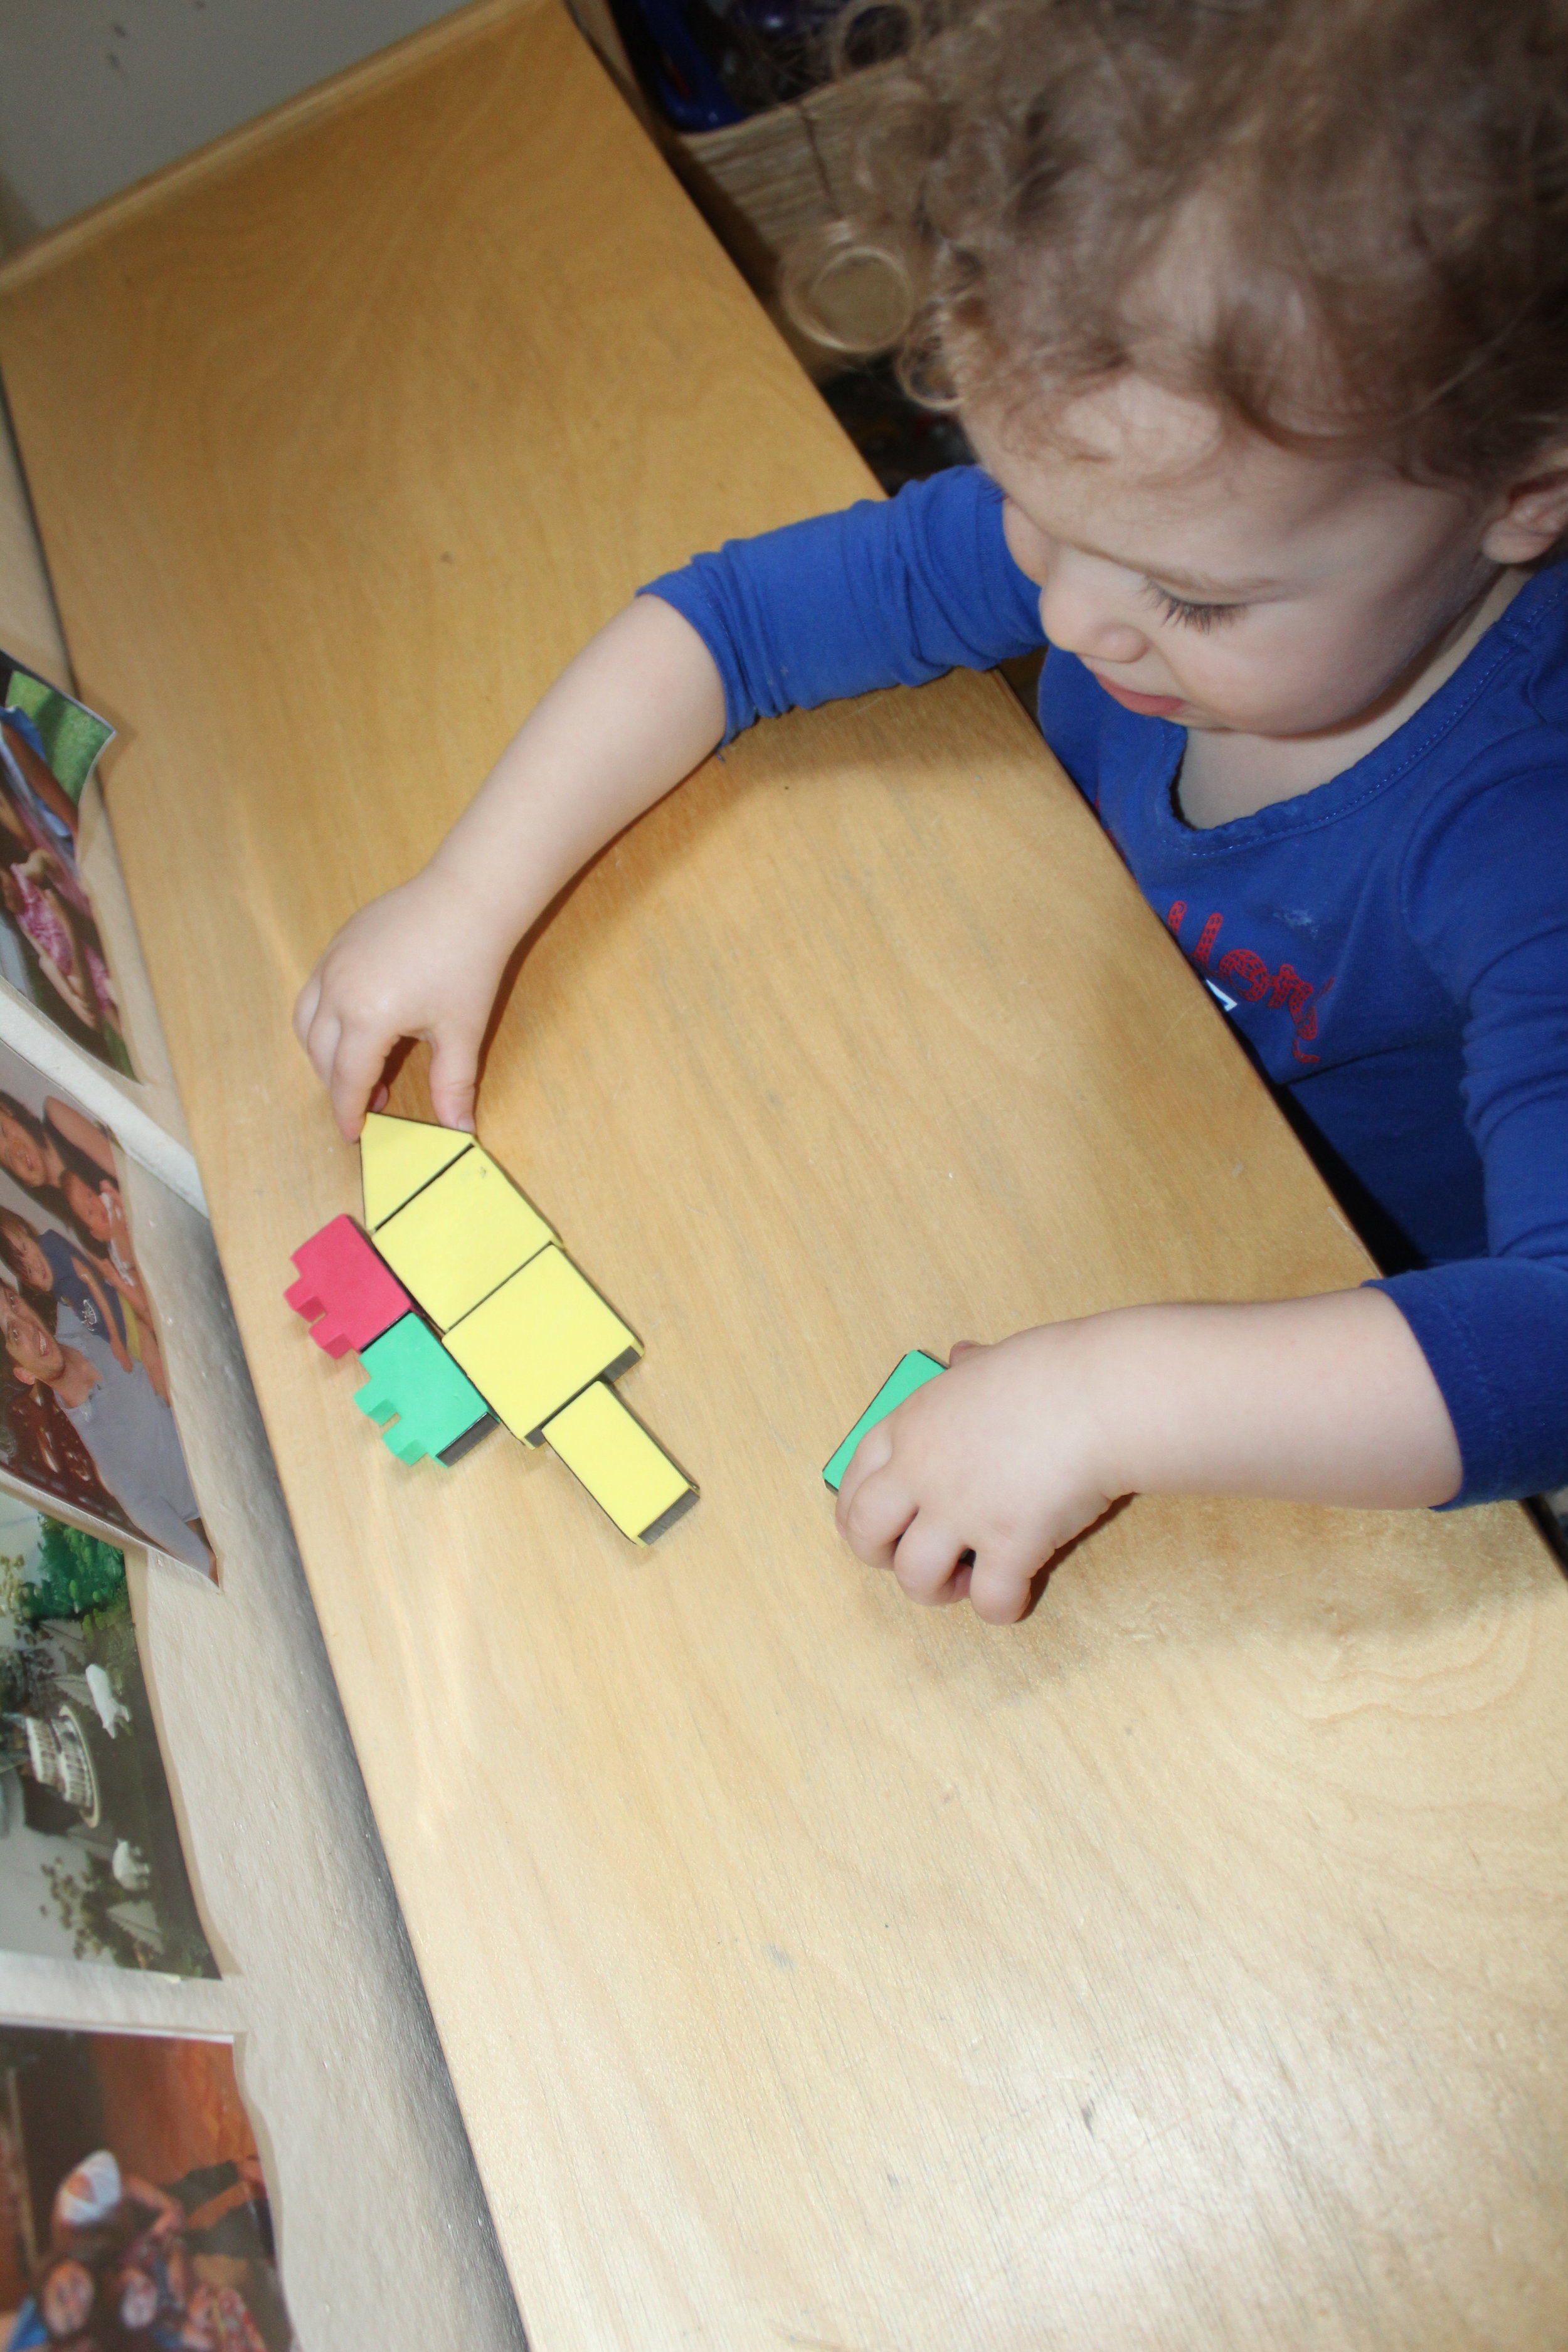  As Remy connects the shape, she said "Square shapes!! A house!" 